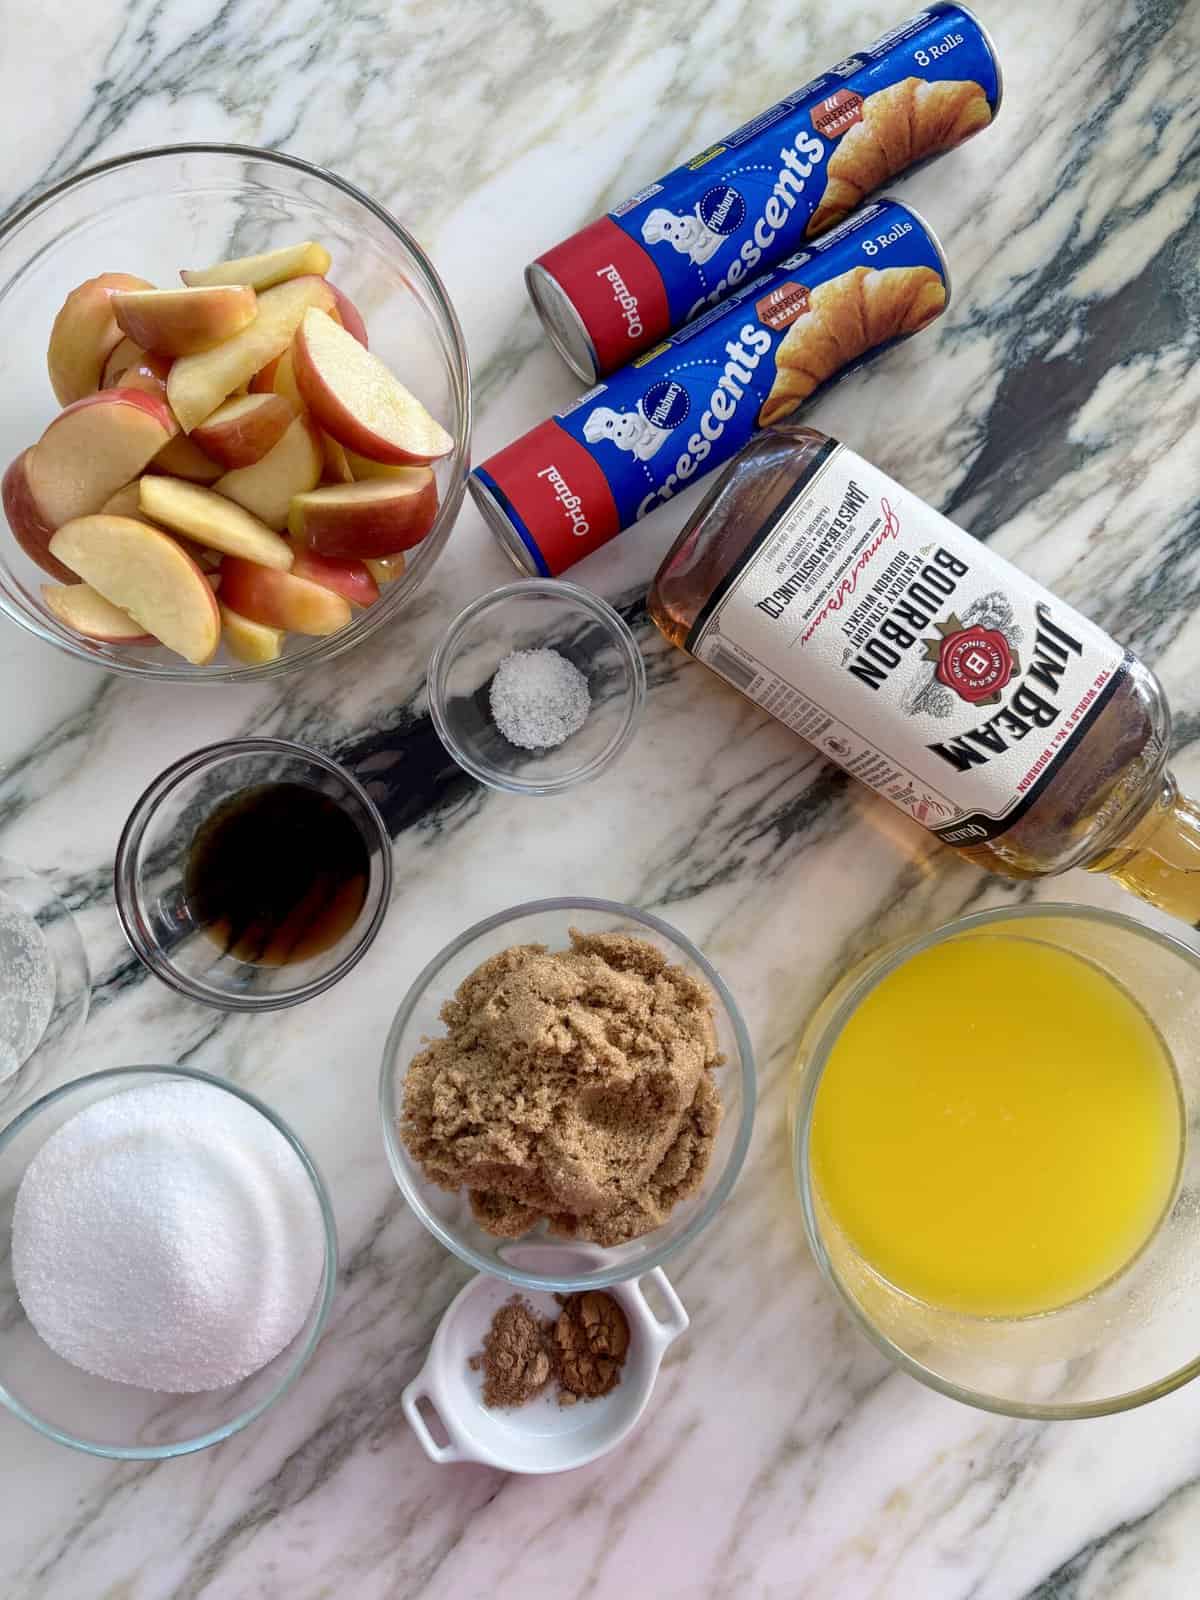 An ingredient shot over a marbled countertop with apples in a bowl along with crescent roll dough, whisky, brown sugar, butter and other ingredients